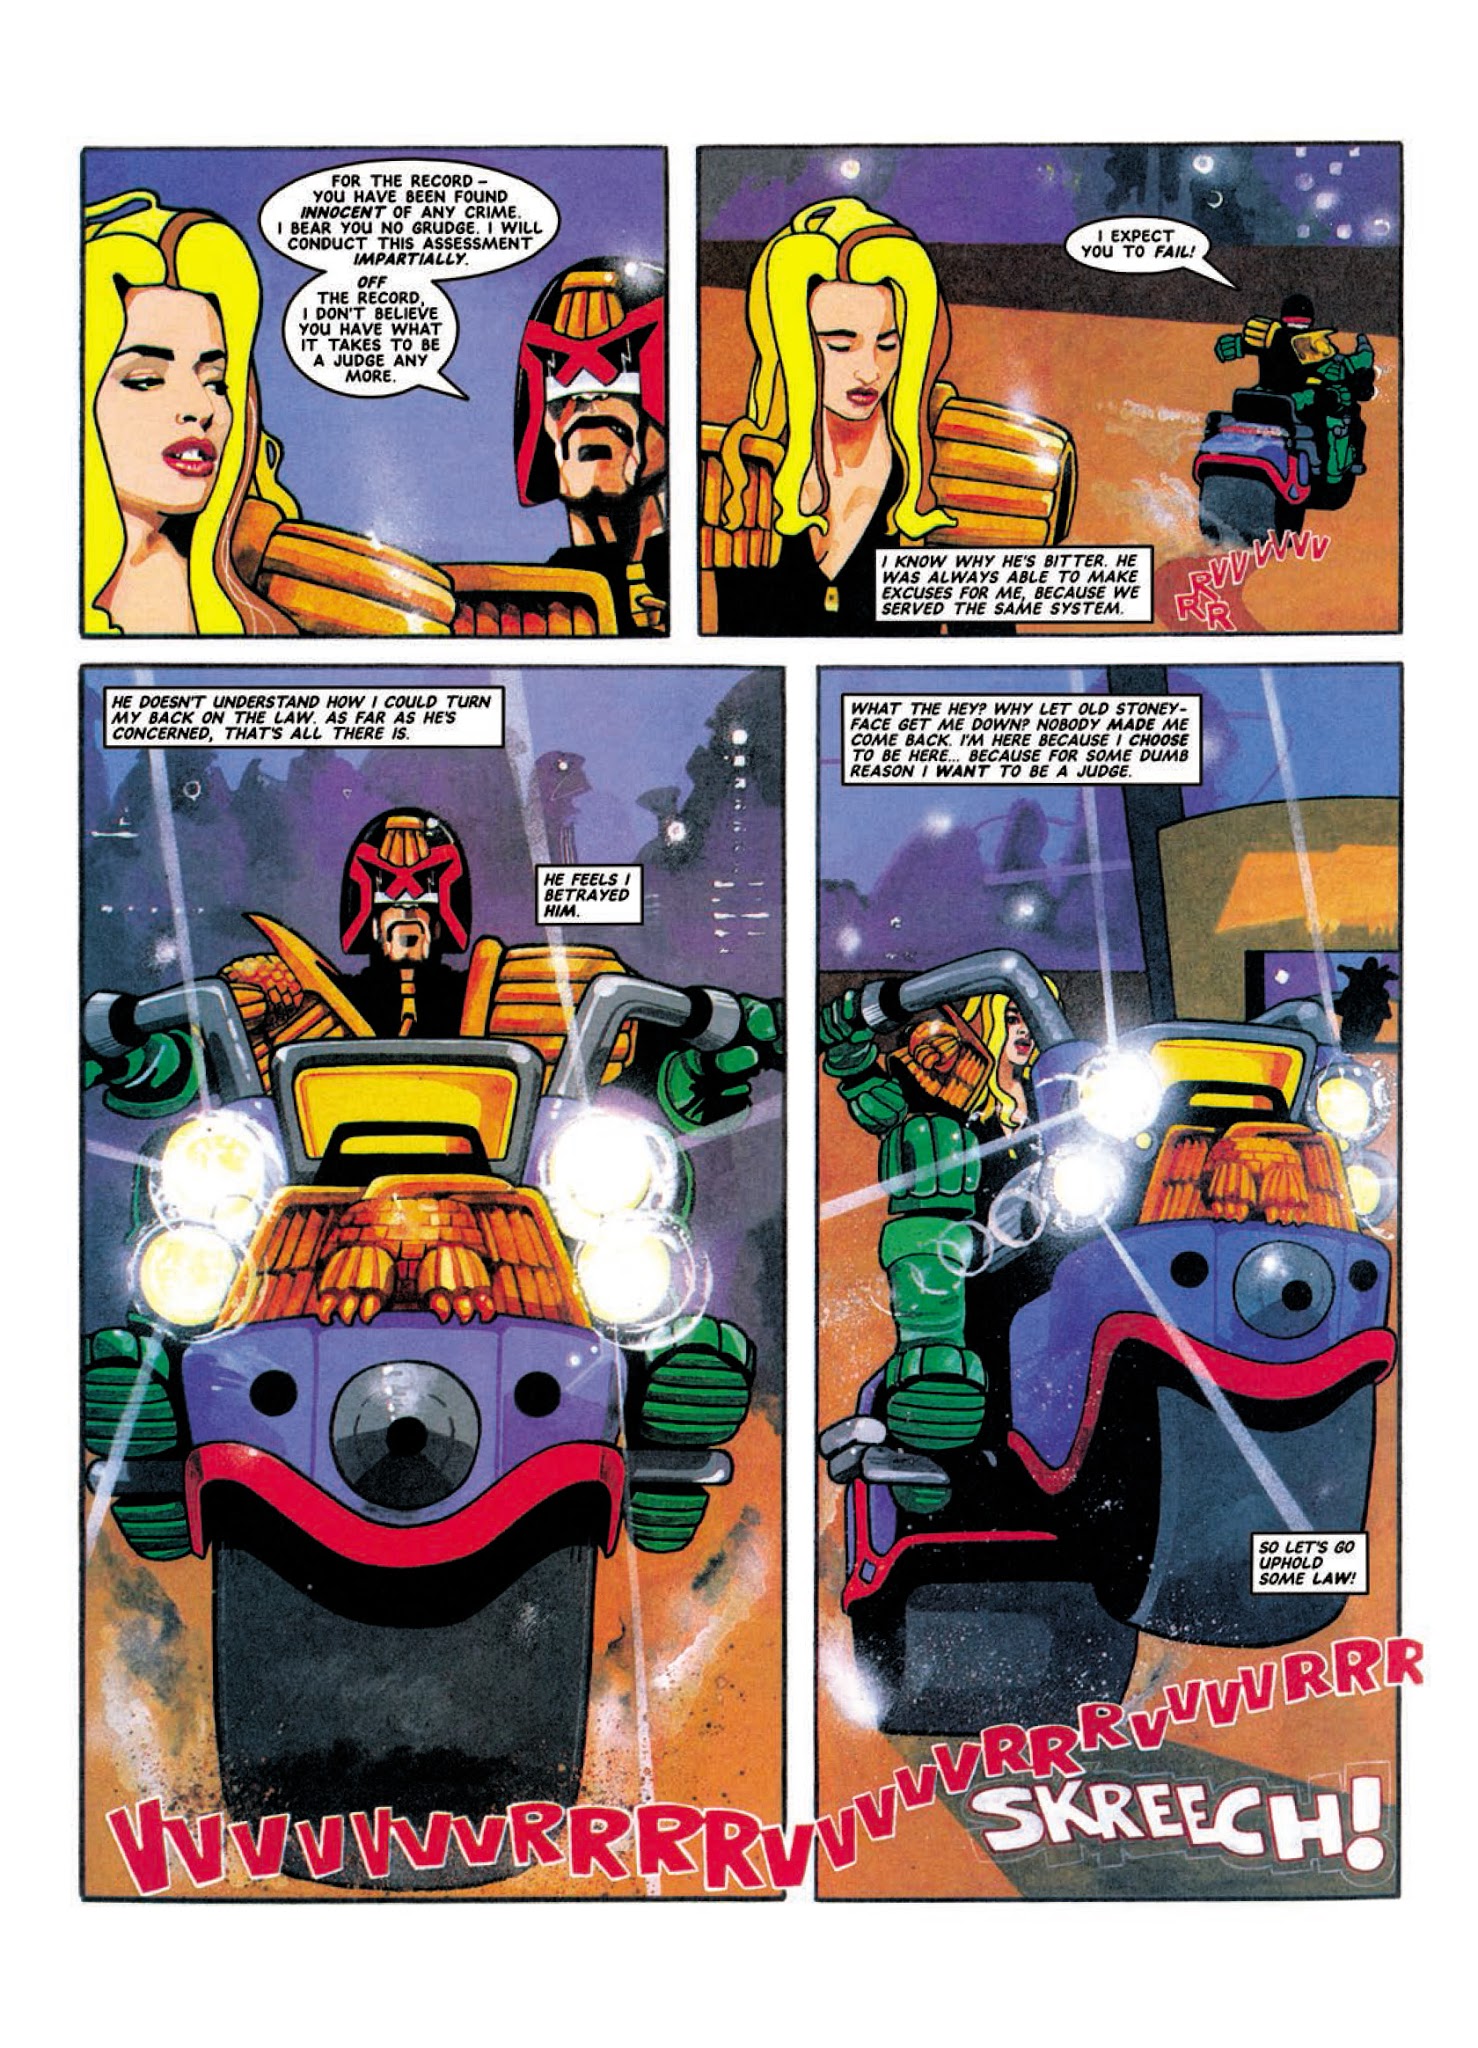 Read online Judge Anderson: The Psi Files comic -  Issue # TPB 3 - 8